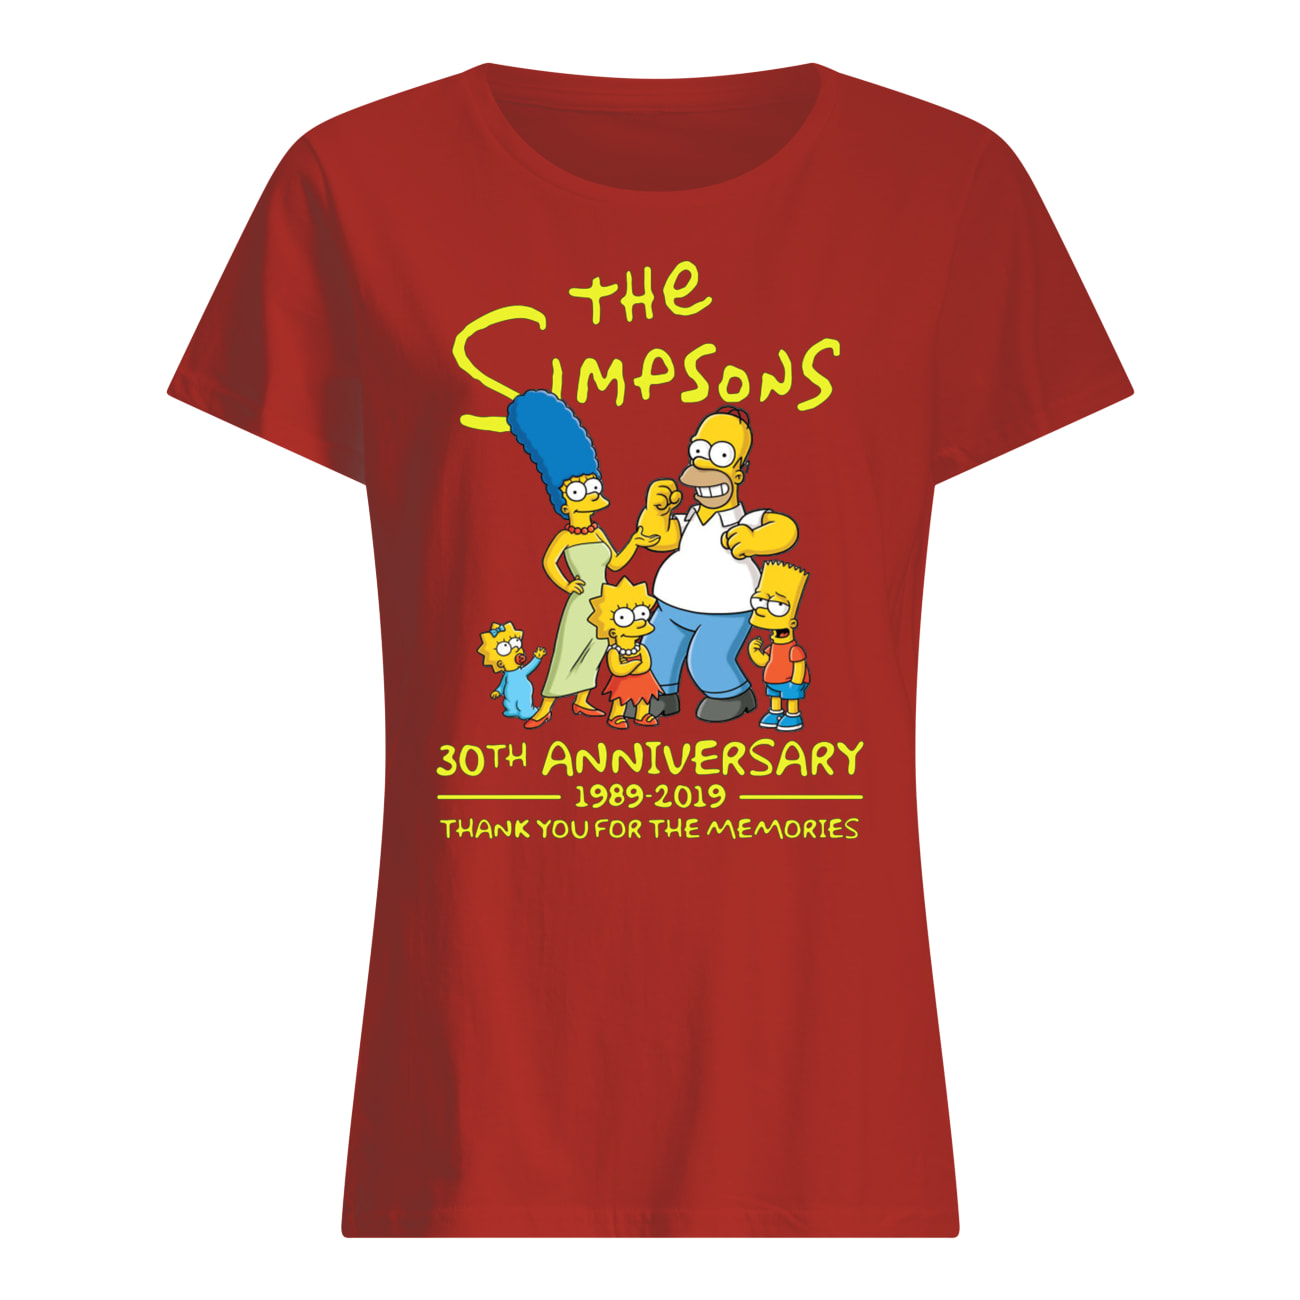 The simpsons 30th anniversary 1989-2019 thank you for memories womens shirt